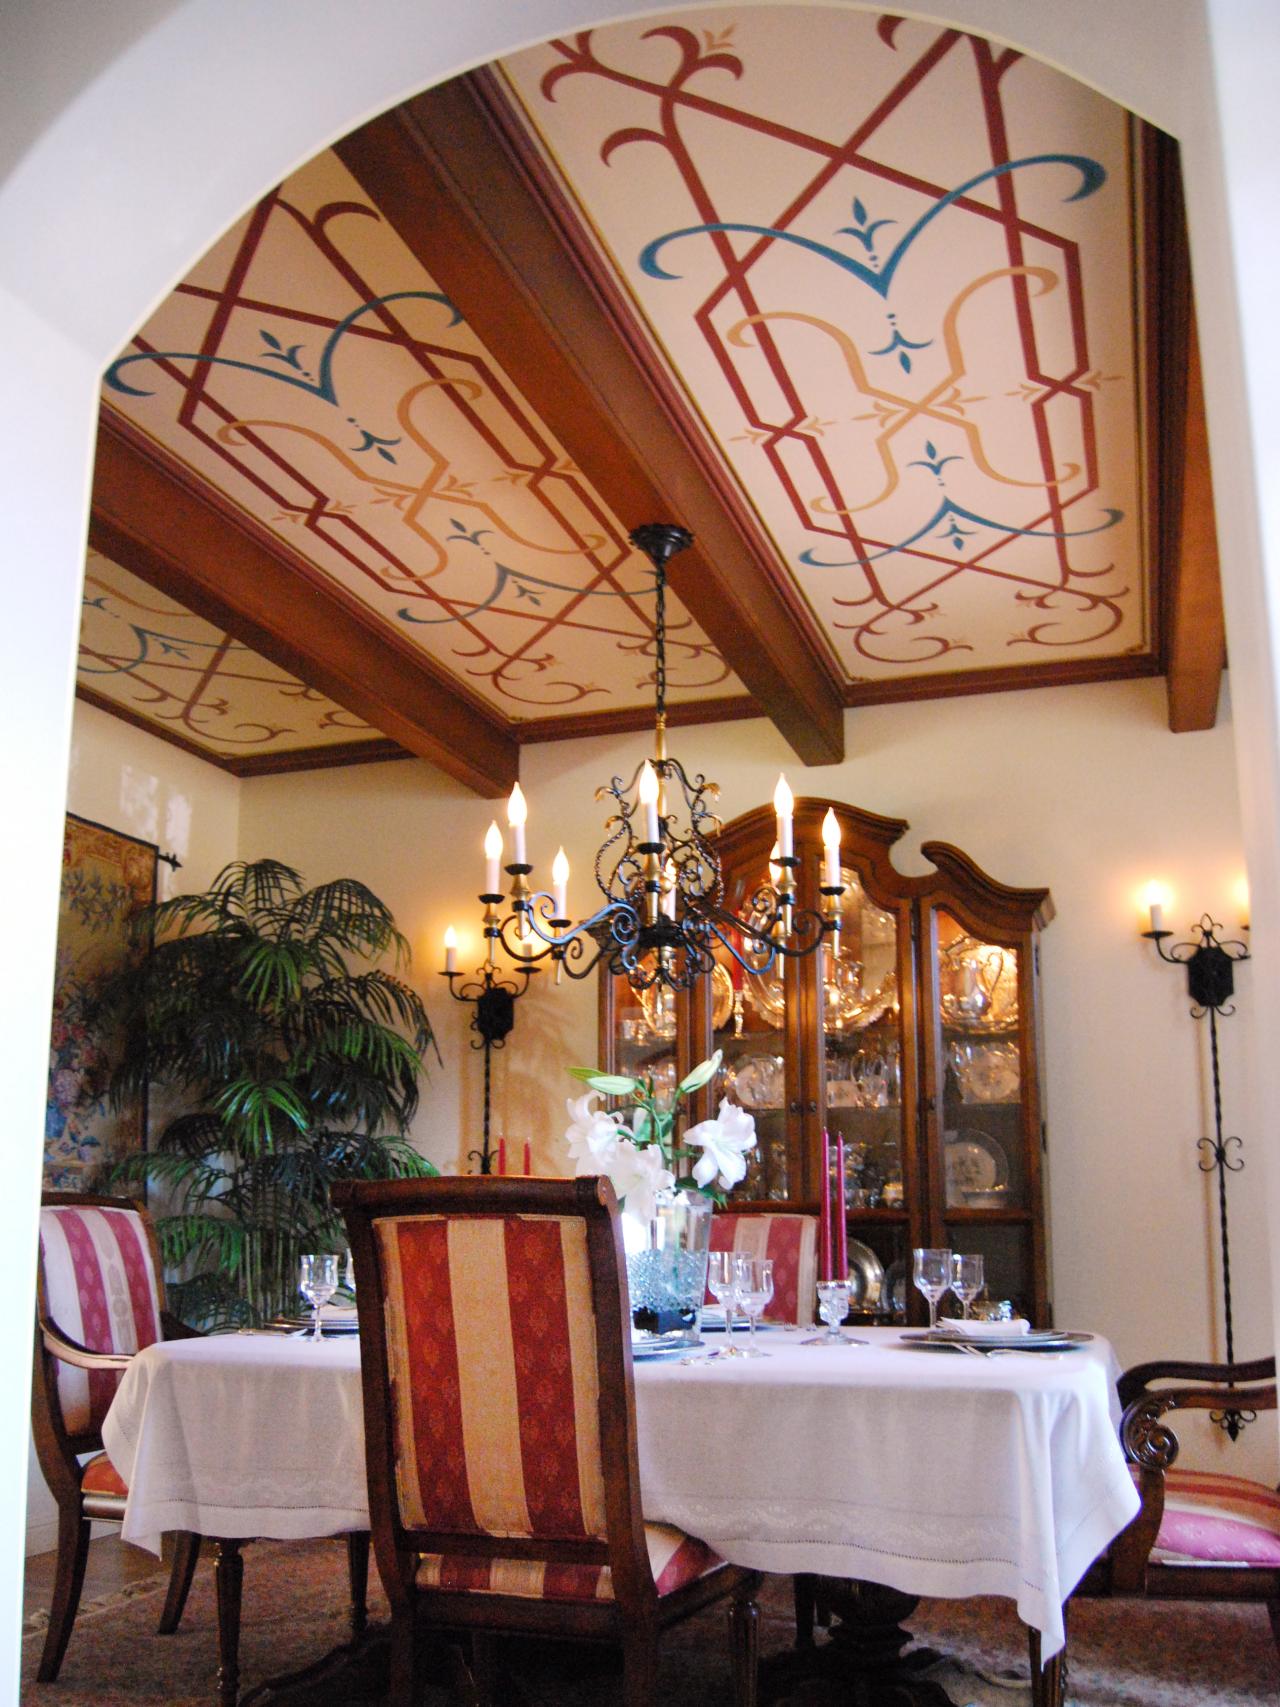 Mediterranean Dining Room With Decorated Ceiling